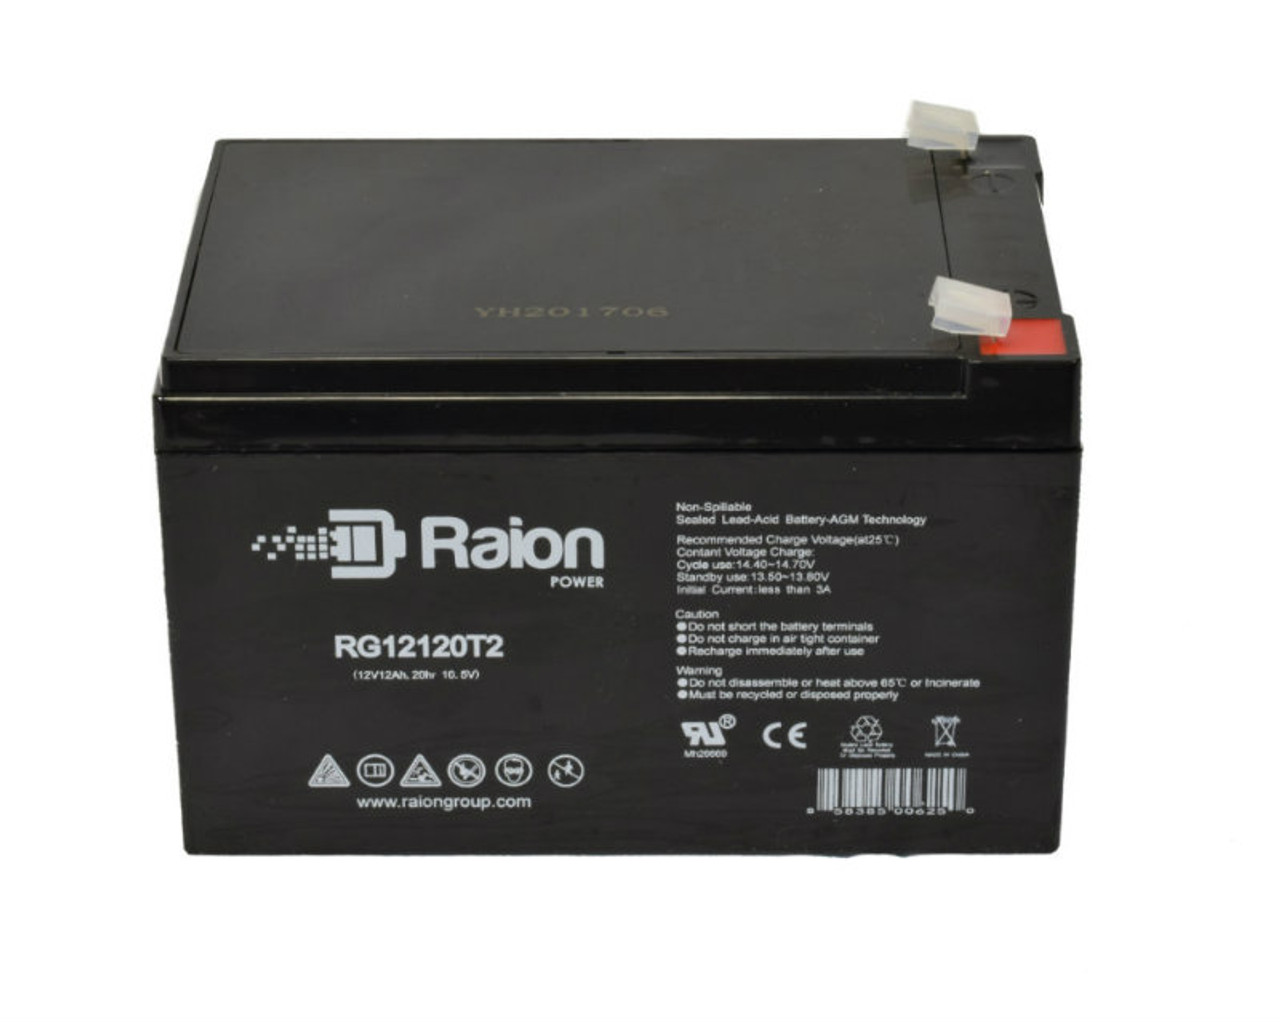 Raion Power RG12120T2 SLA Battery for Merits Health Products S549 Mini-Coupe Wheelchairs